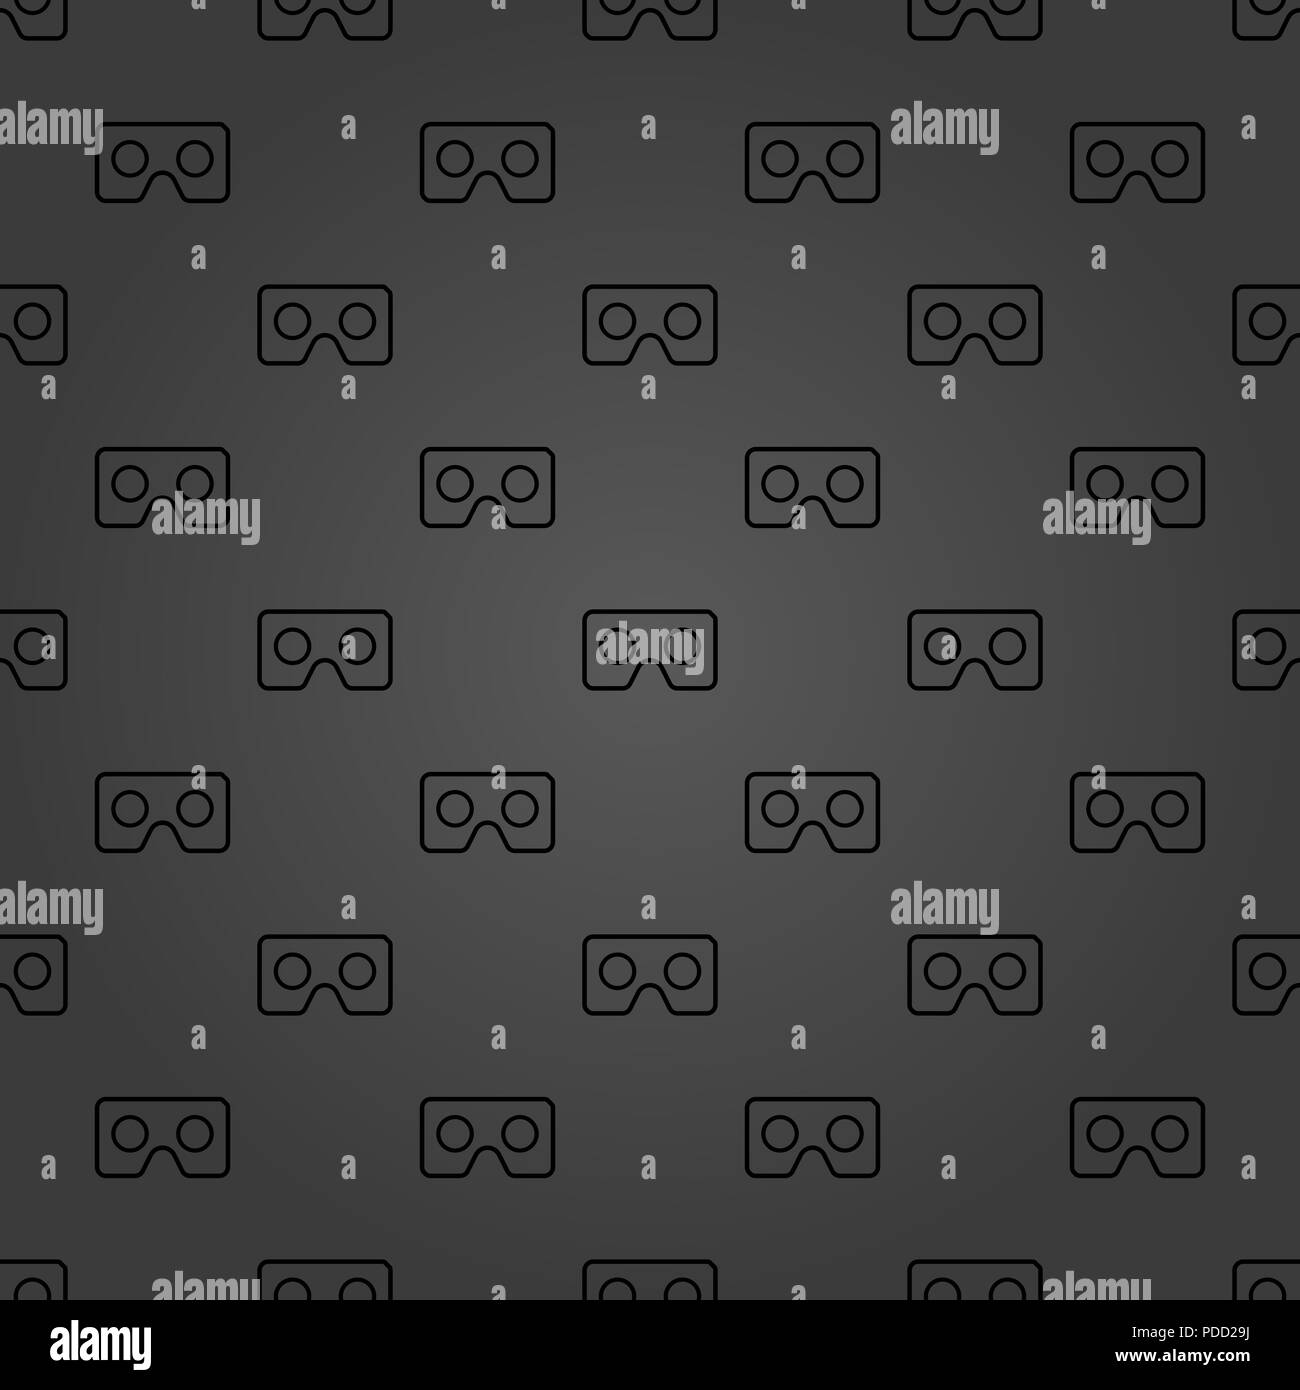 Seamless Pattern With VR Logos Stock Photo